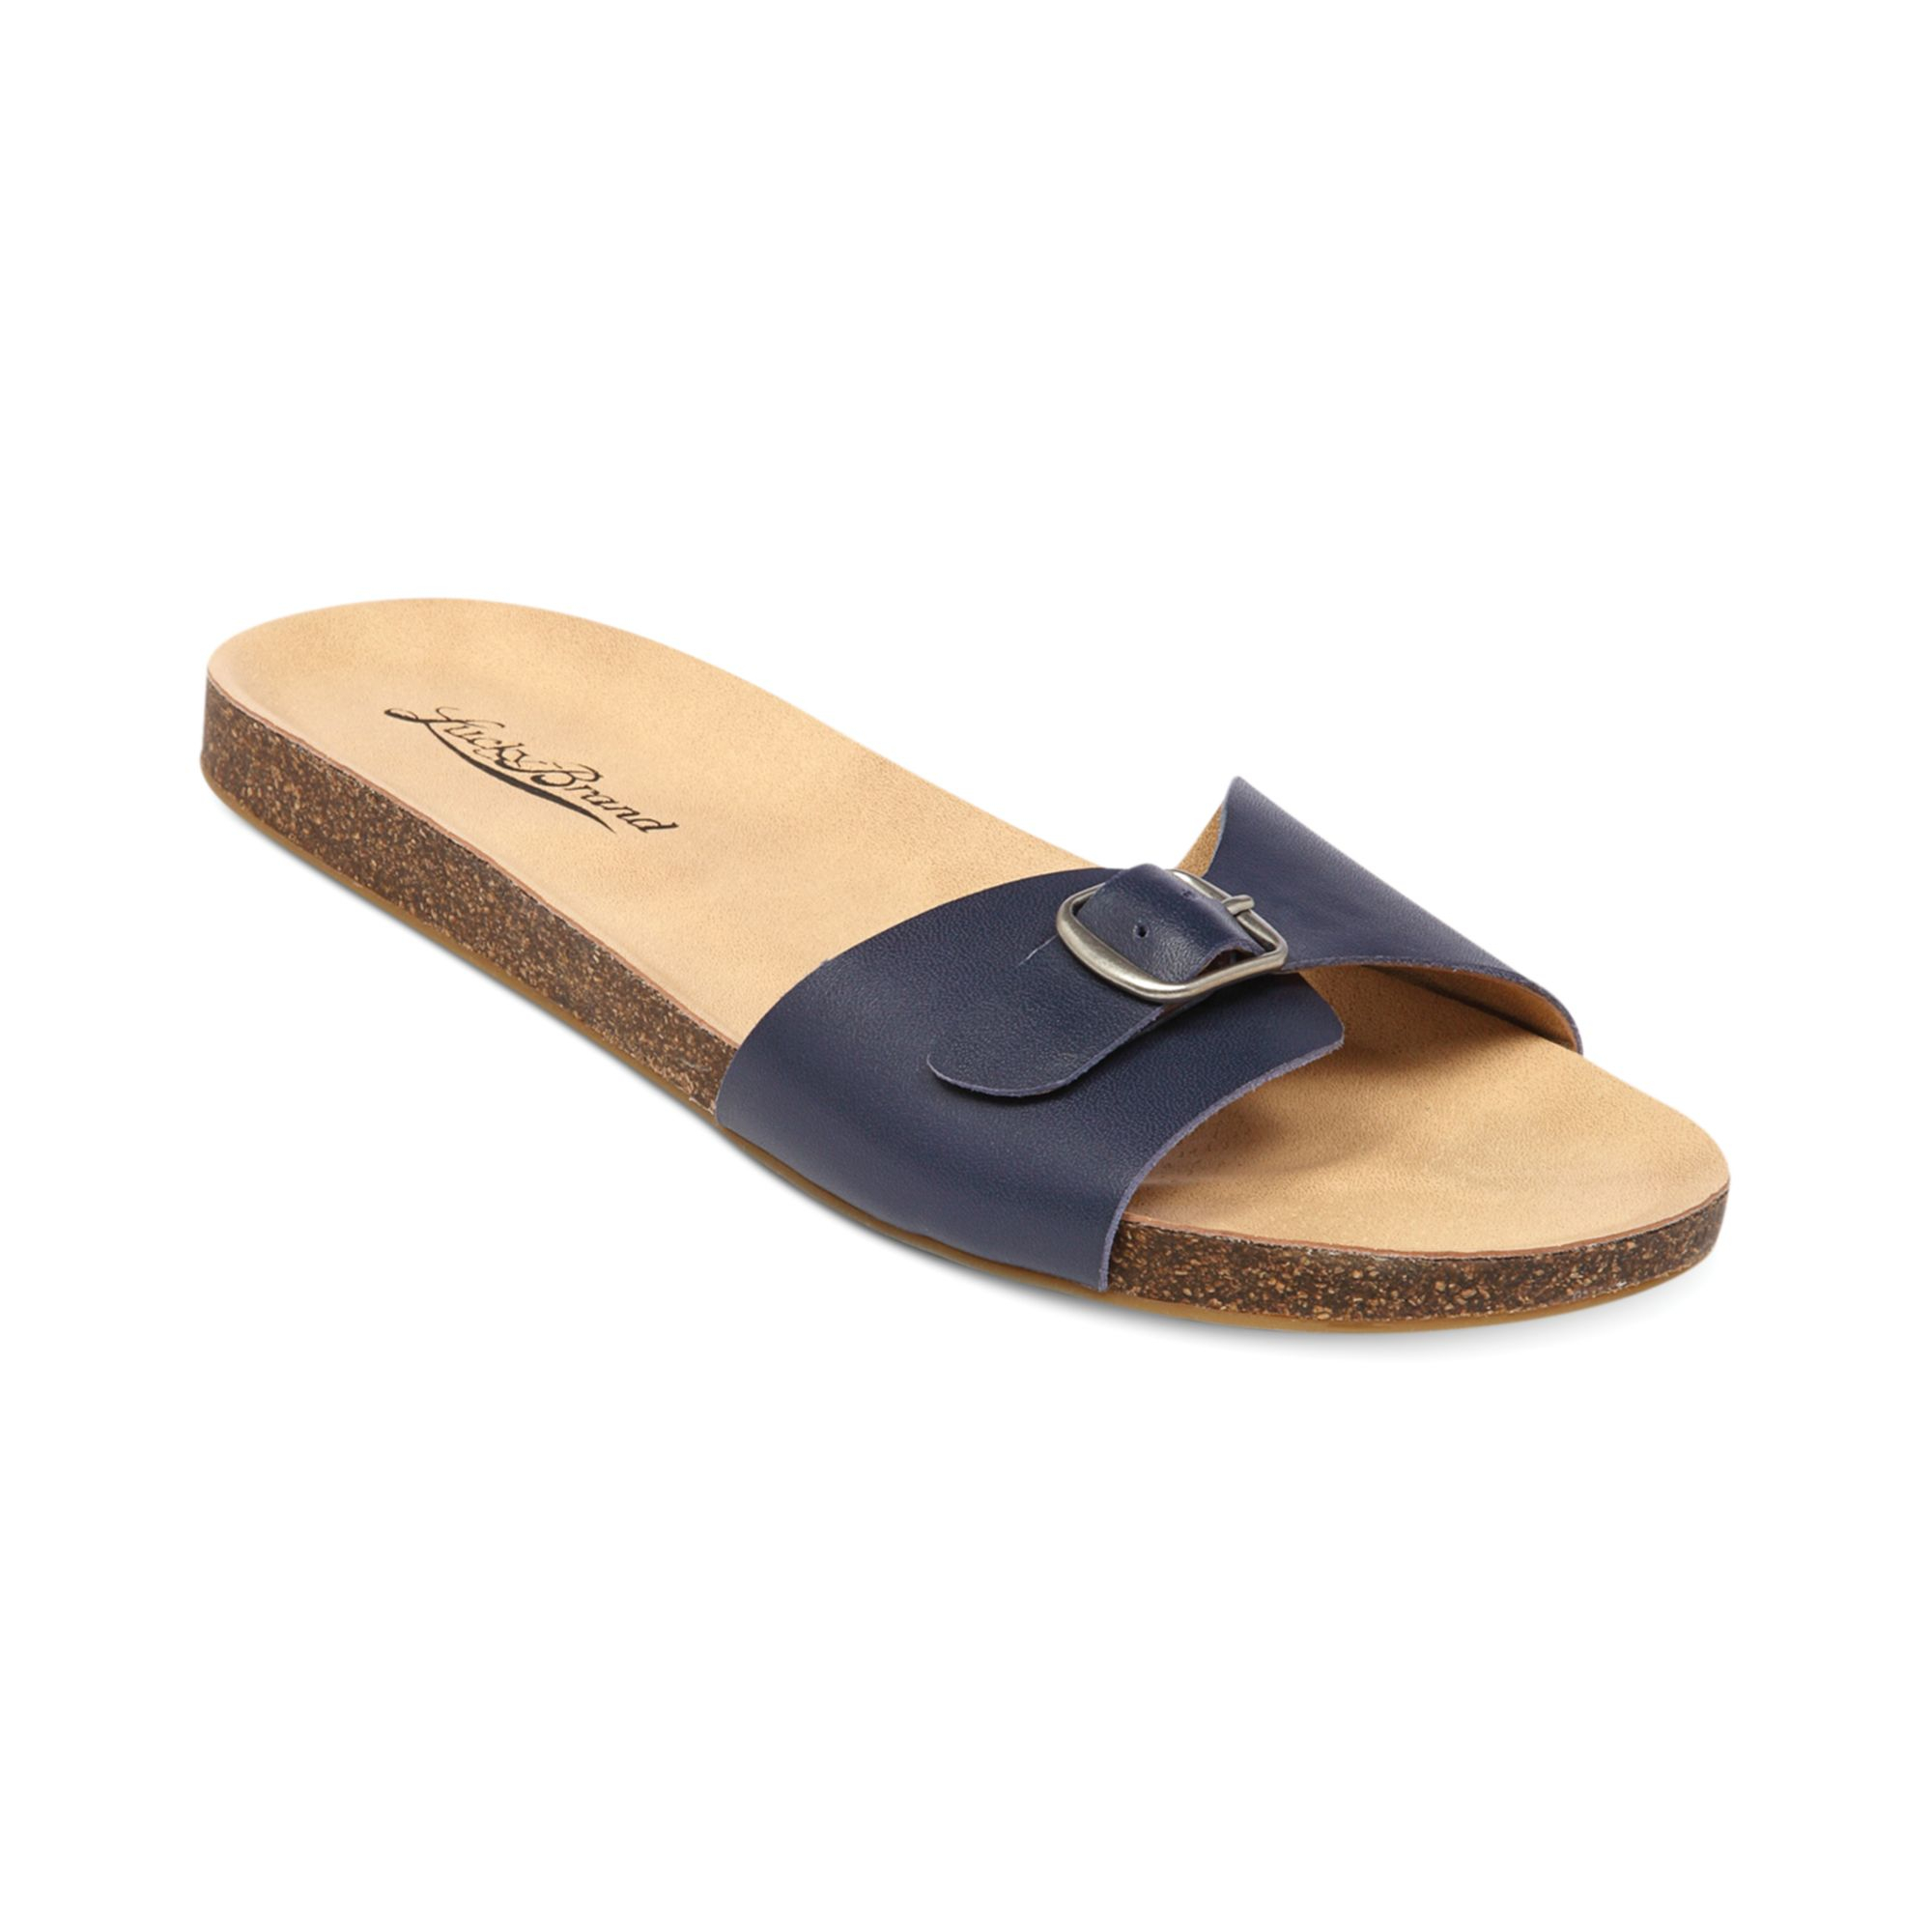 Lyst - Lucky Brand Womens Dolliee Flat Slide Sandals in Blue